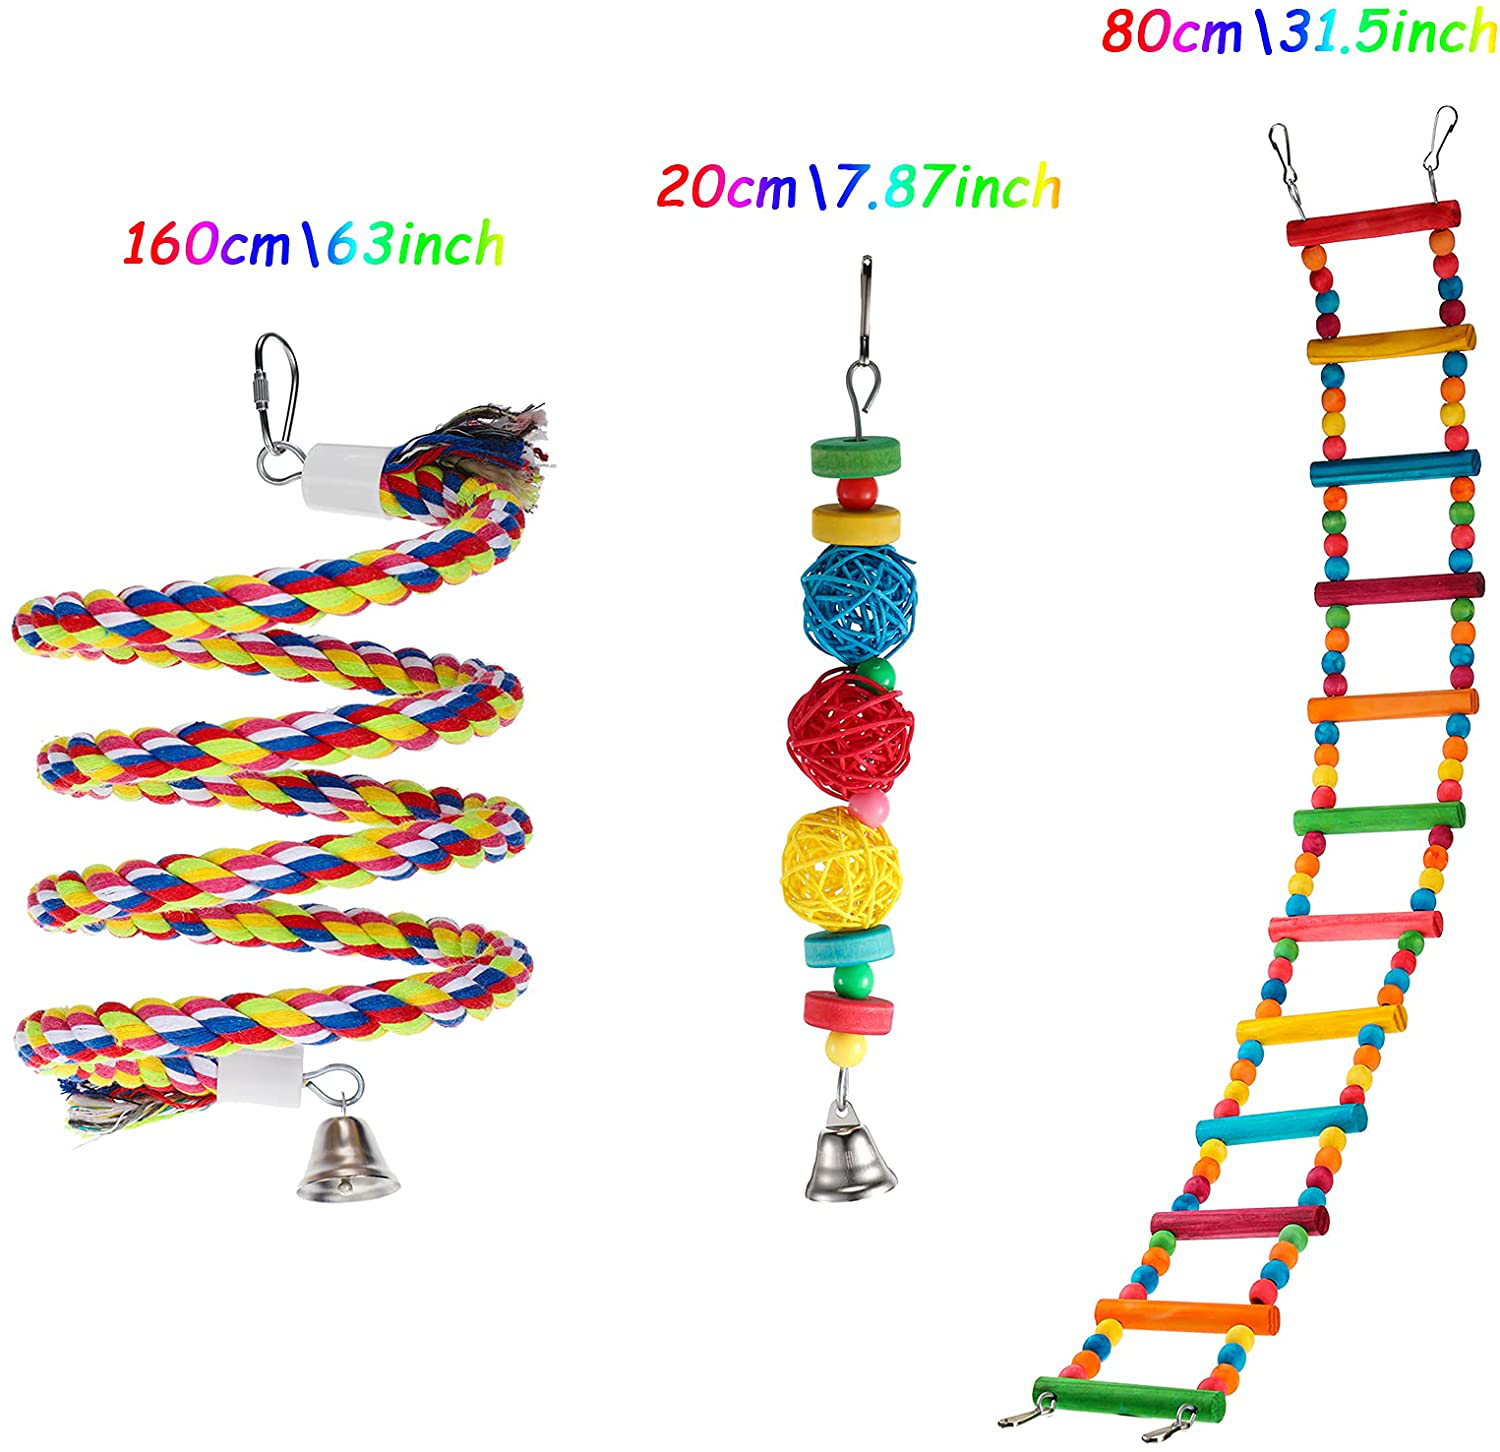 Skylety 3 Pieces Parrot Toys Include Bird Swing Ladders Bird Spiral Rope Perch Hanging Bell Rattan Balls Parrot Climbing Standing Chewing Toys for Small Parakeets Cockatiels Lovebirds Conures